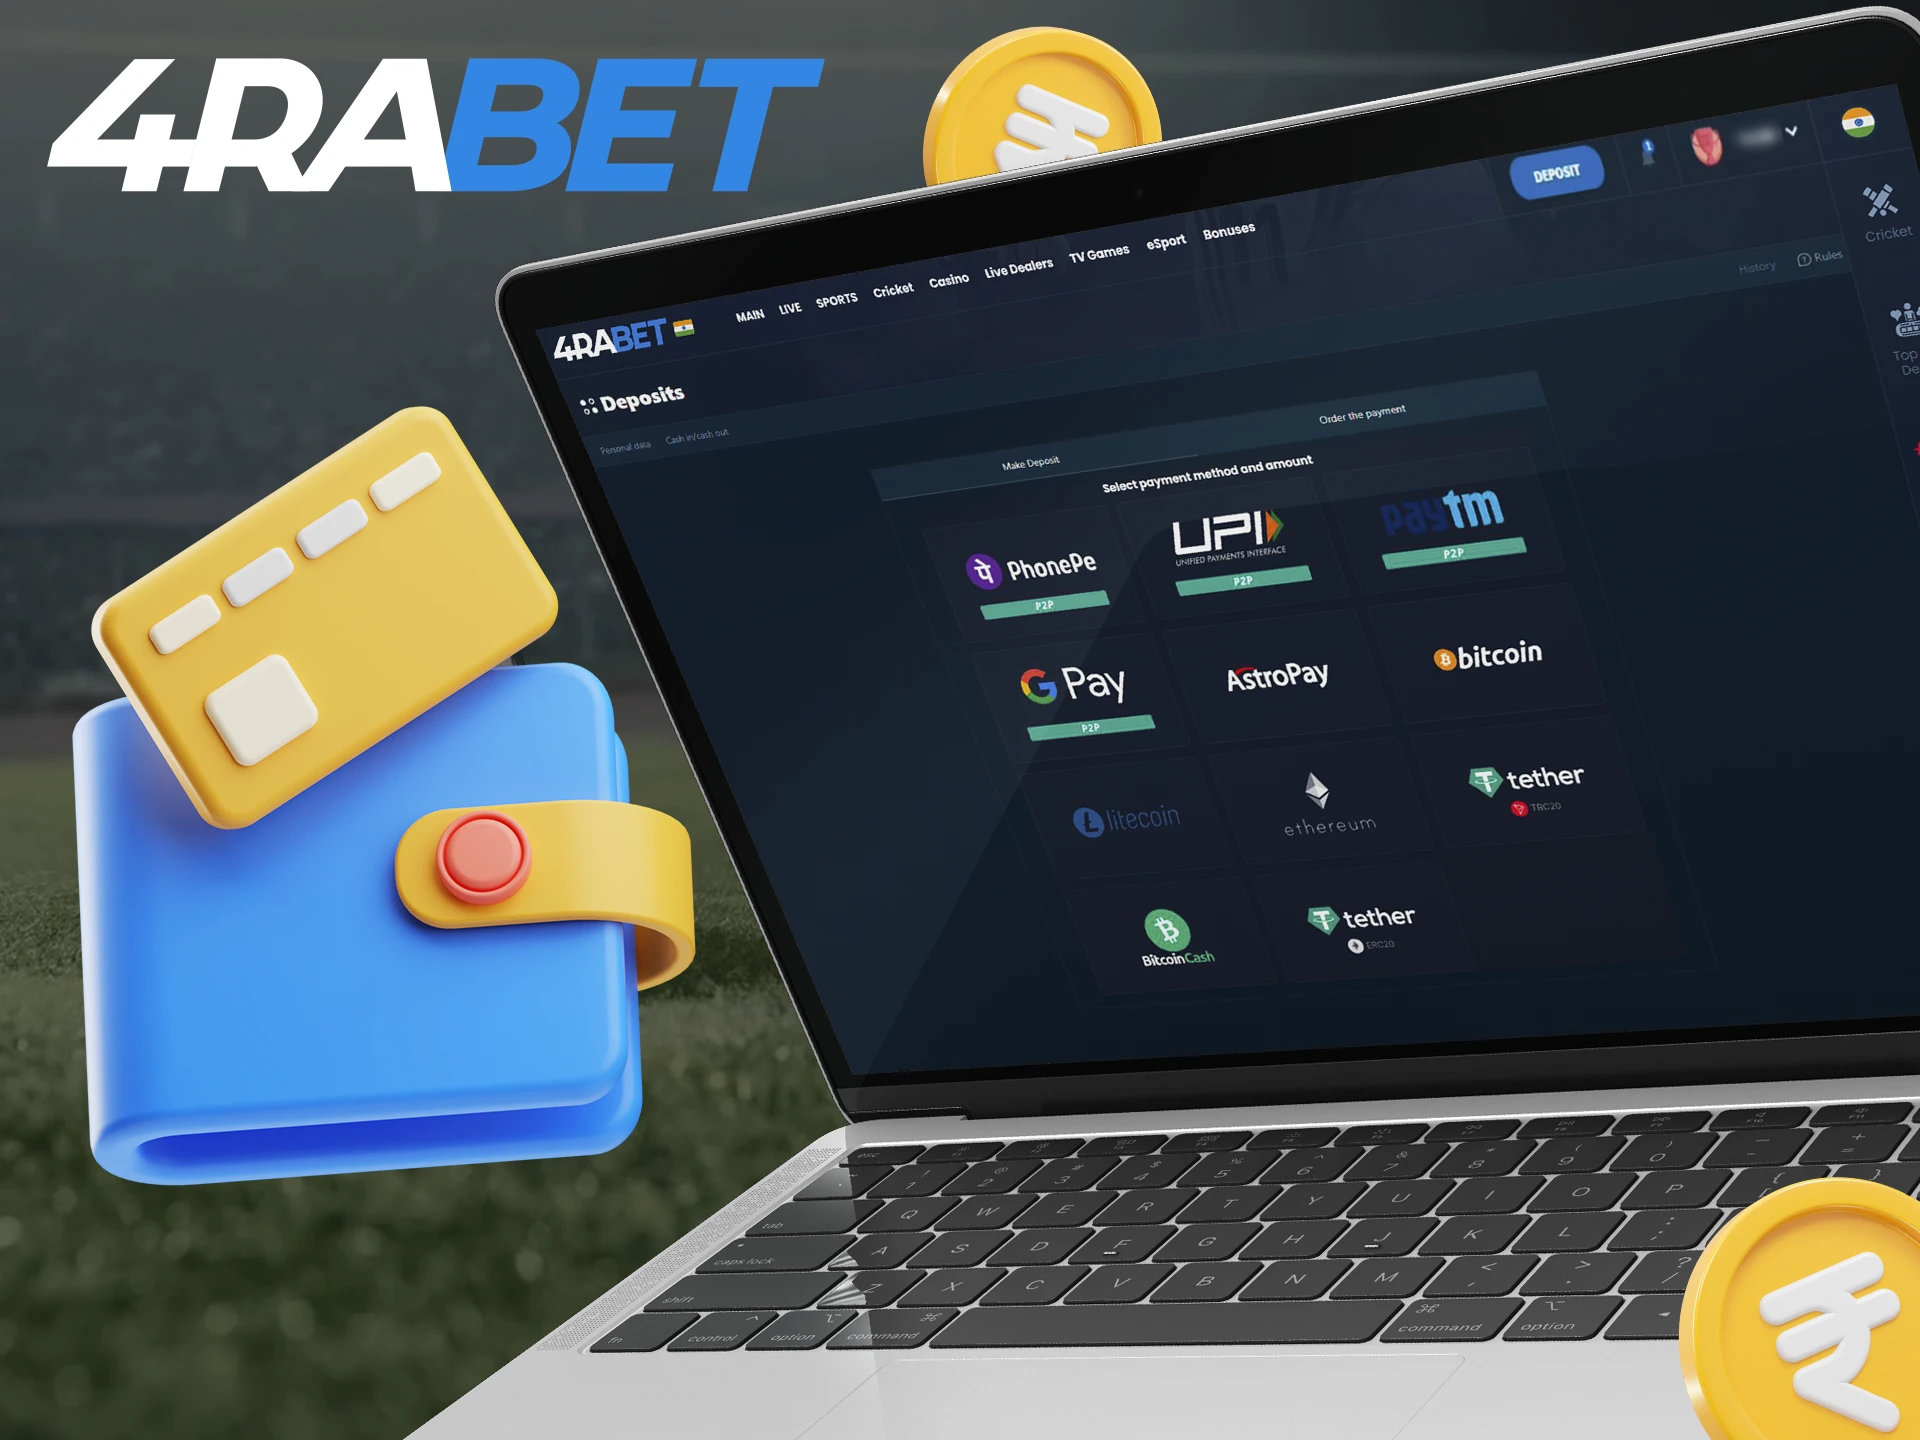 4Rabet offers convenient deposit and withdrawal methods.